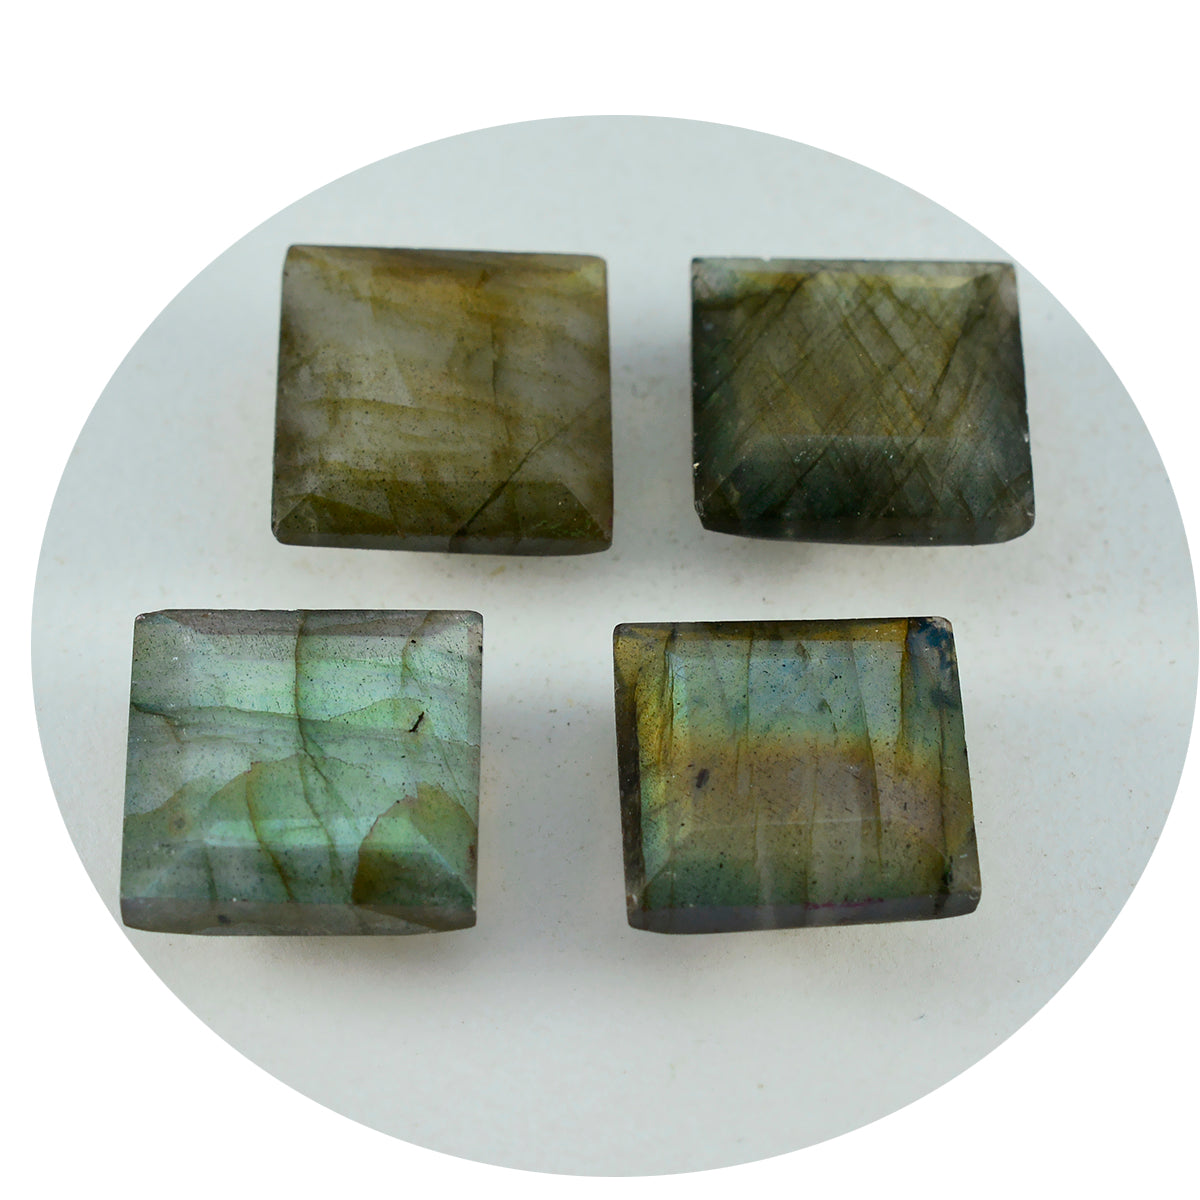 Riyogems 1PC Real Grey Labradorite Faceted 11x11 mm Square Shape nice-looking Quality Gems